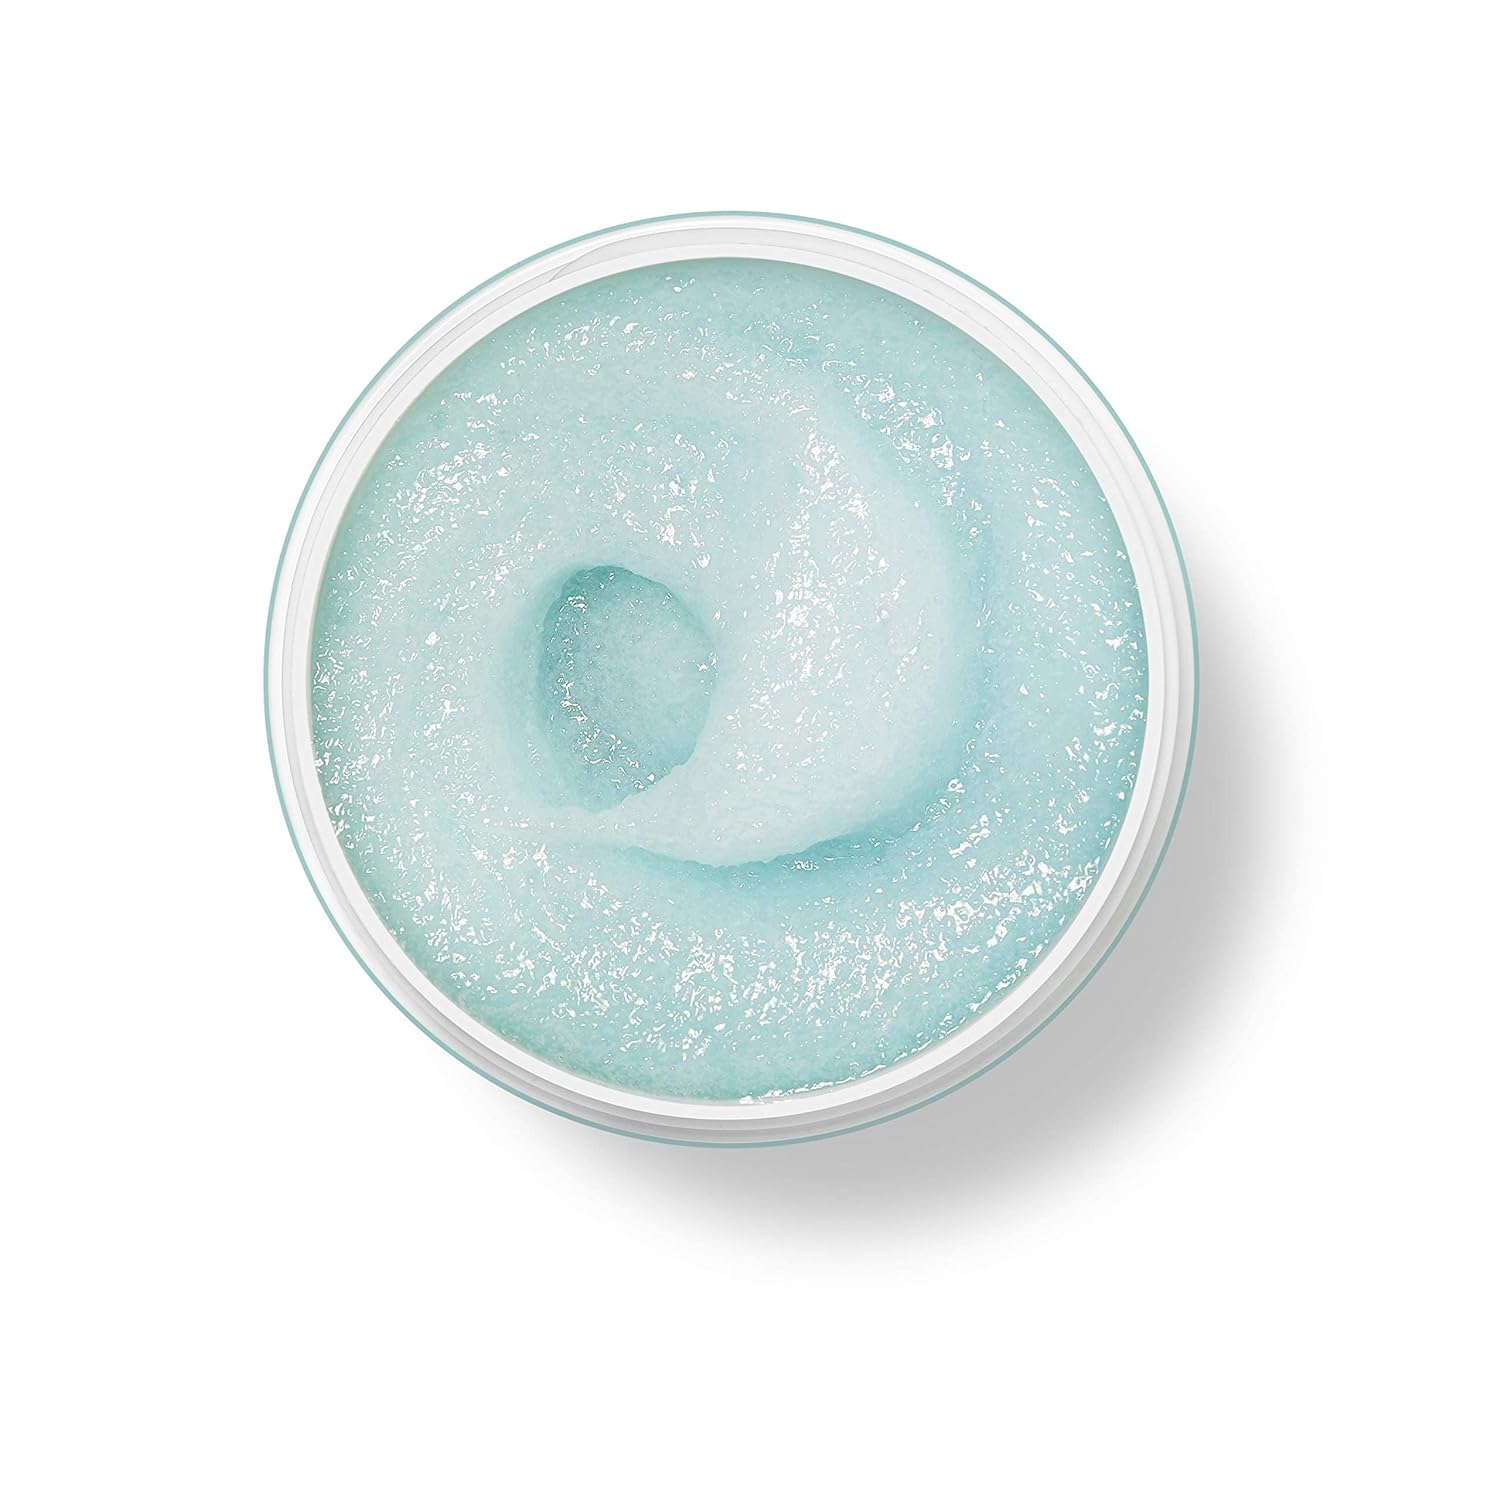 Bliss Hot Salt Scrub, Self-Heating Body Polish | Warming Scrub to Exfoliate, Heal, and Smooth Skin | Straight-from-the Spa | Paraben Free, Cruelty Free | 10.6 oz : Body Scrubs : Beauty & Personal Care